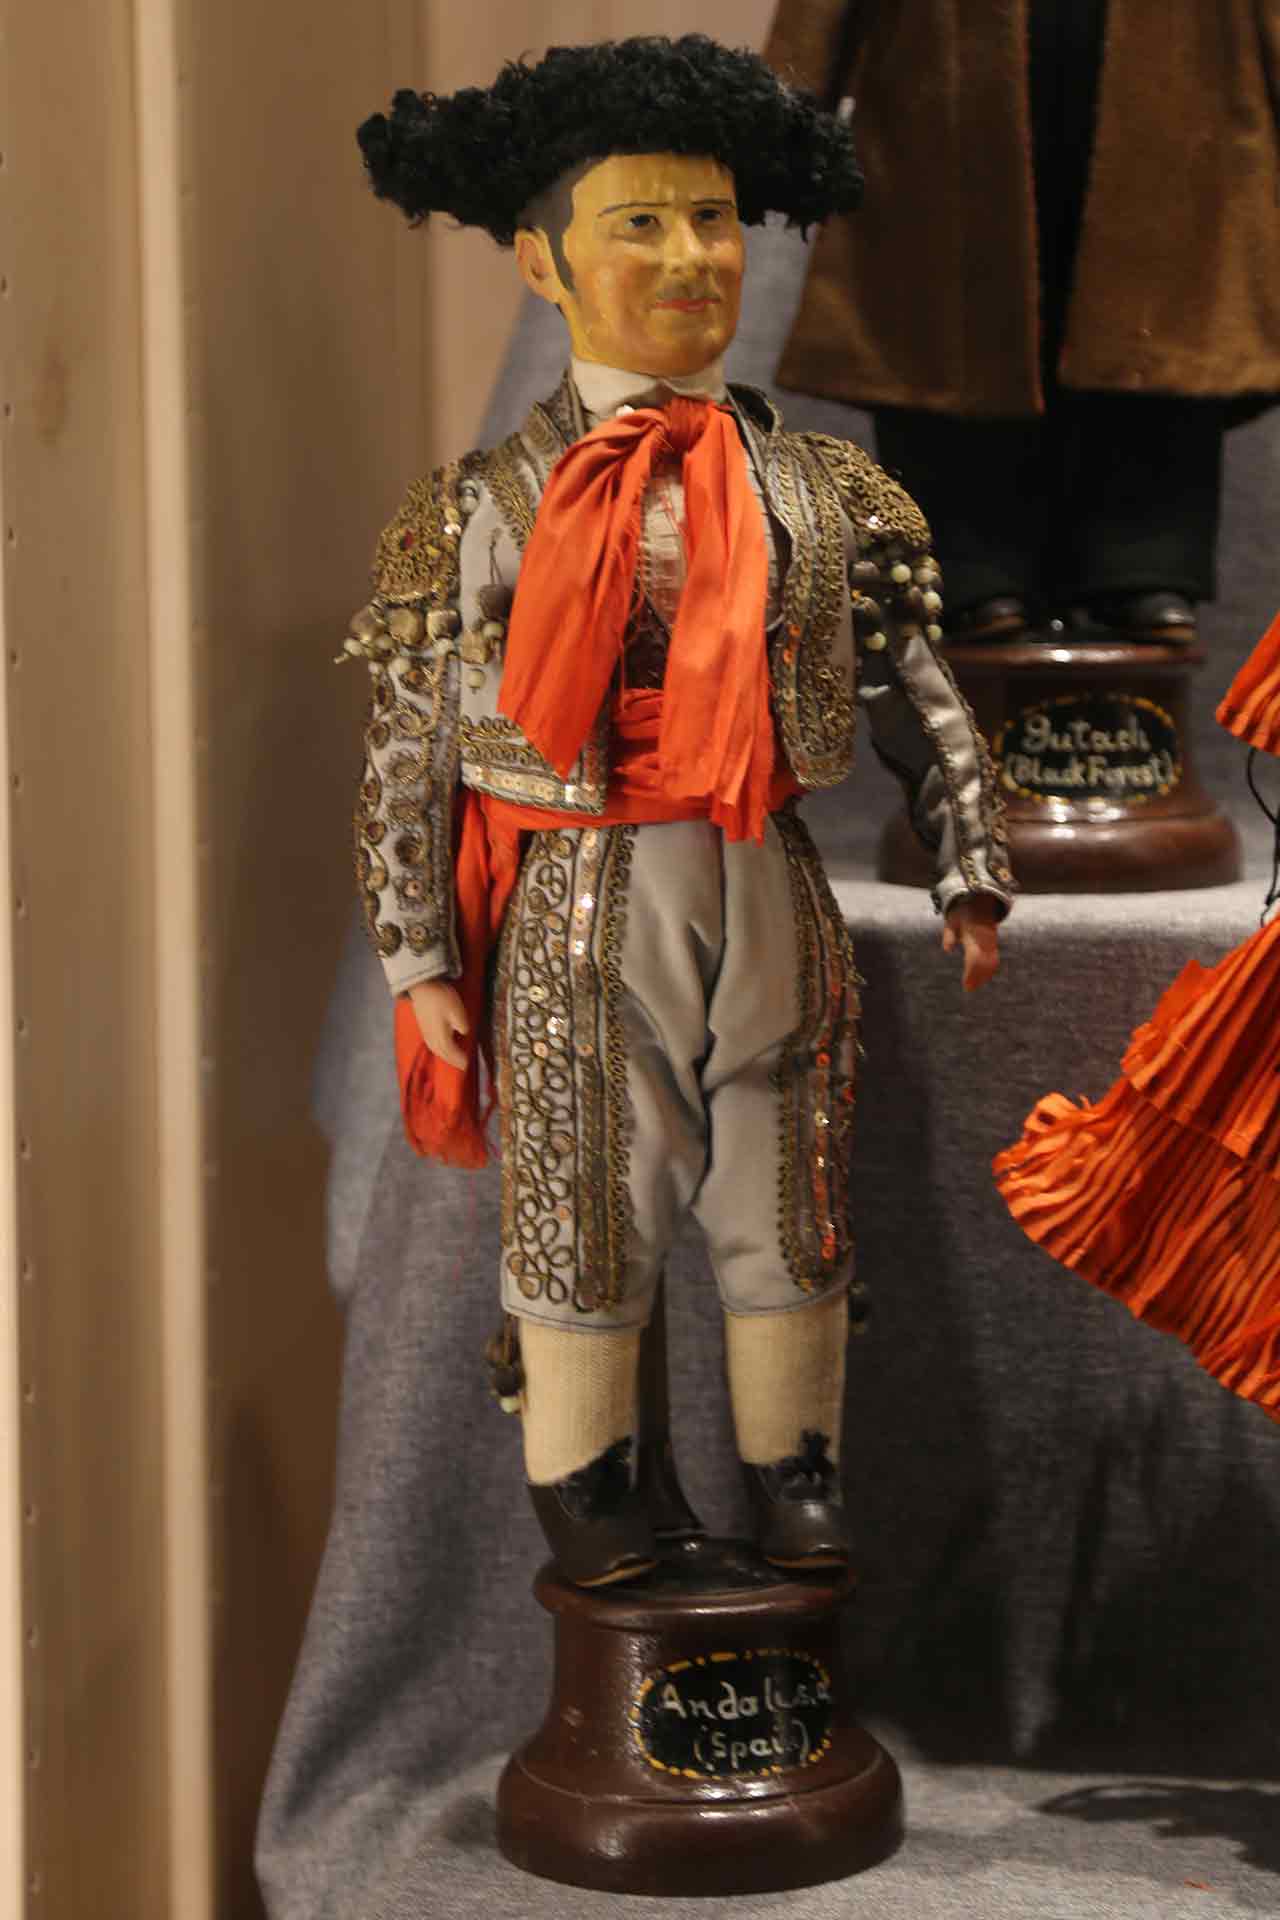 Male doll from Spain wearing gray trousers and coat, with a hat